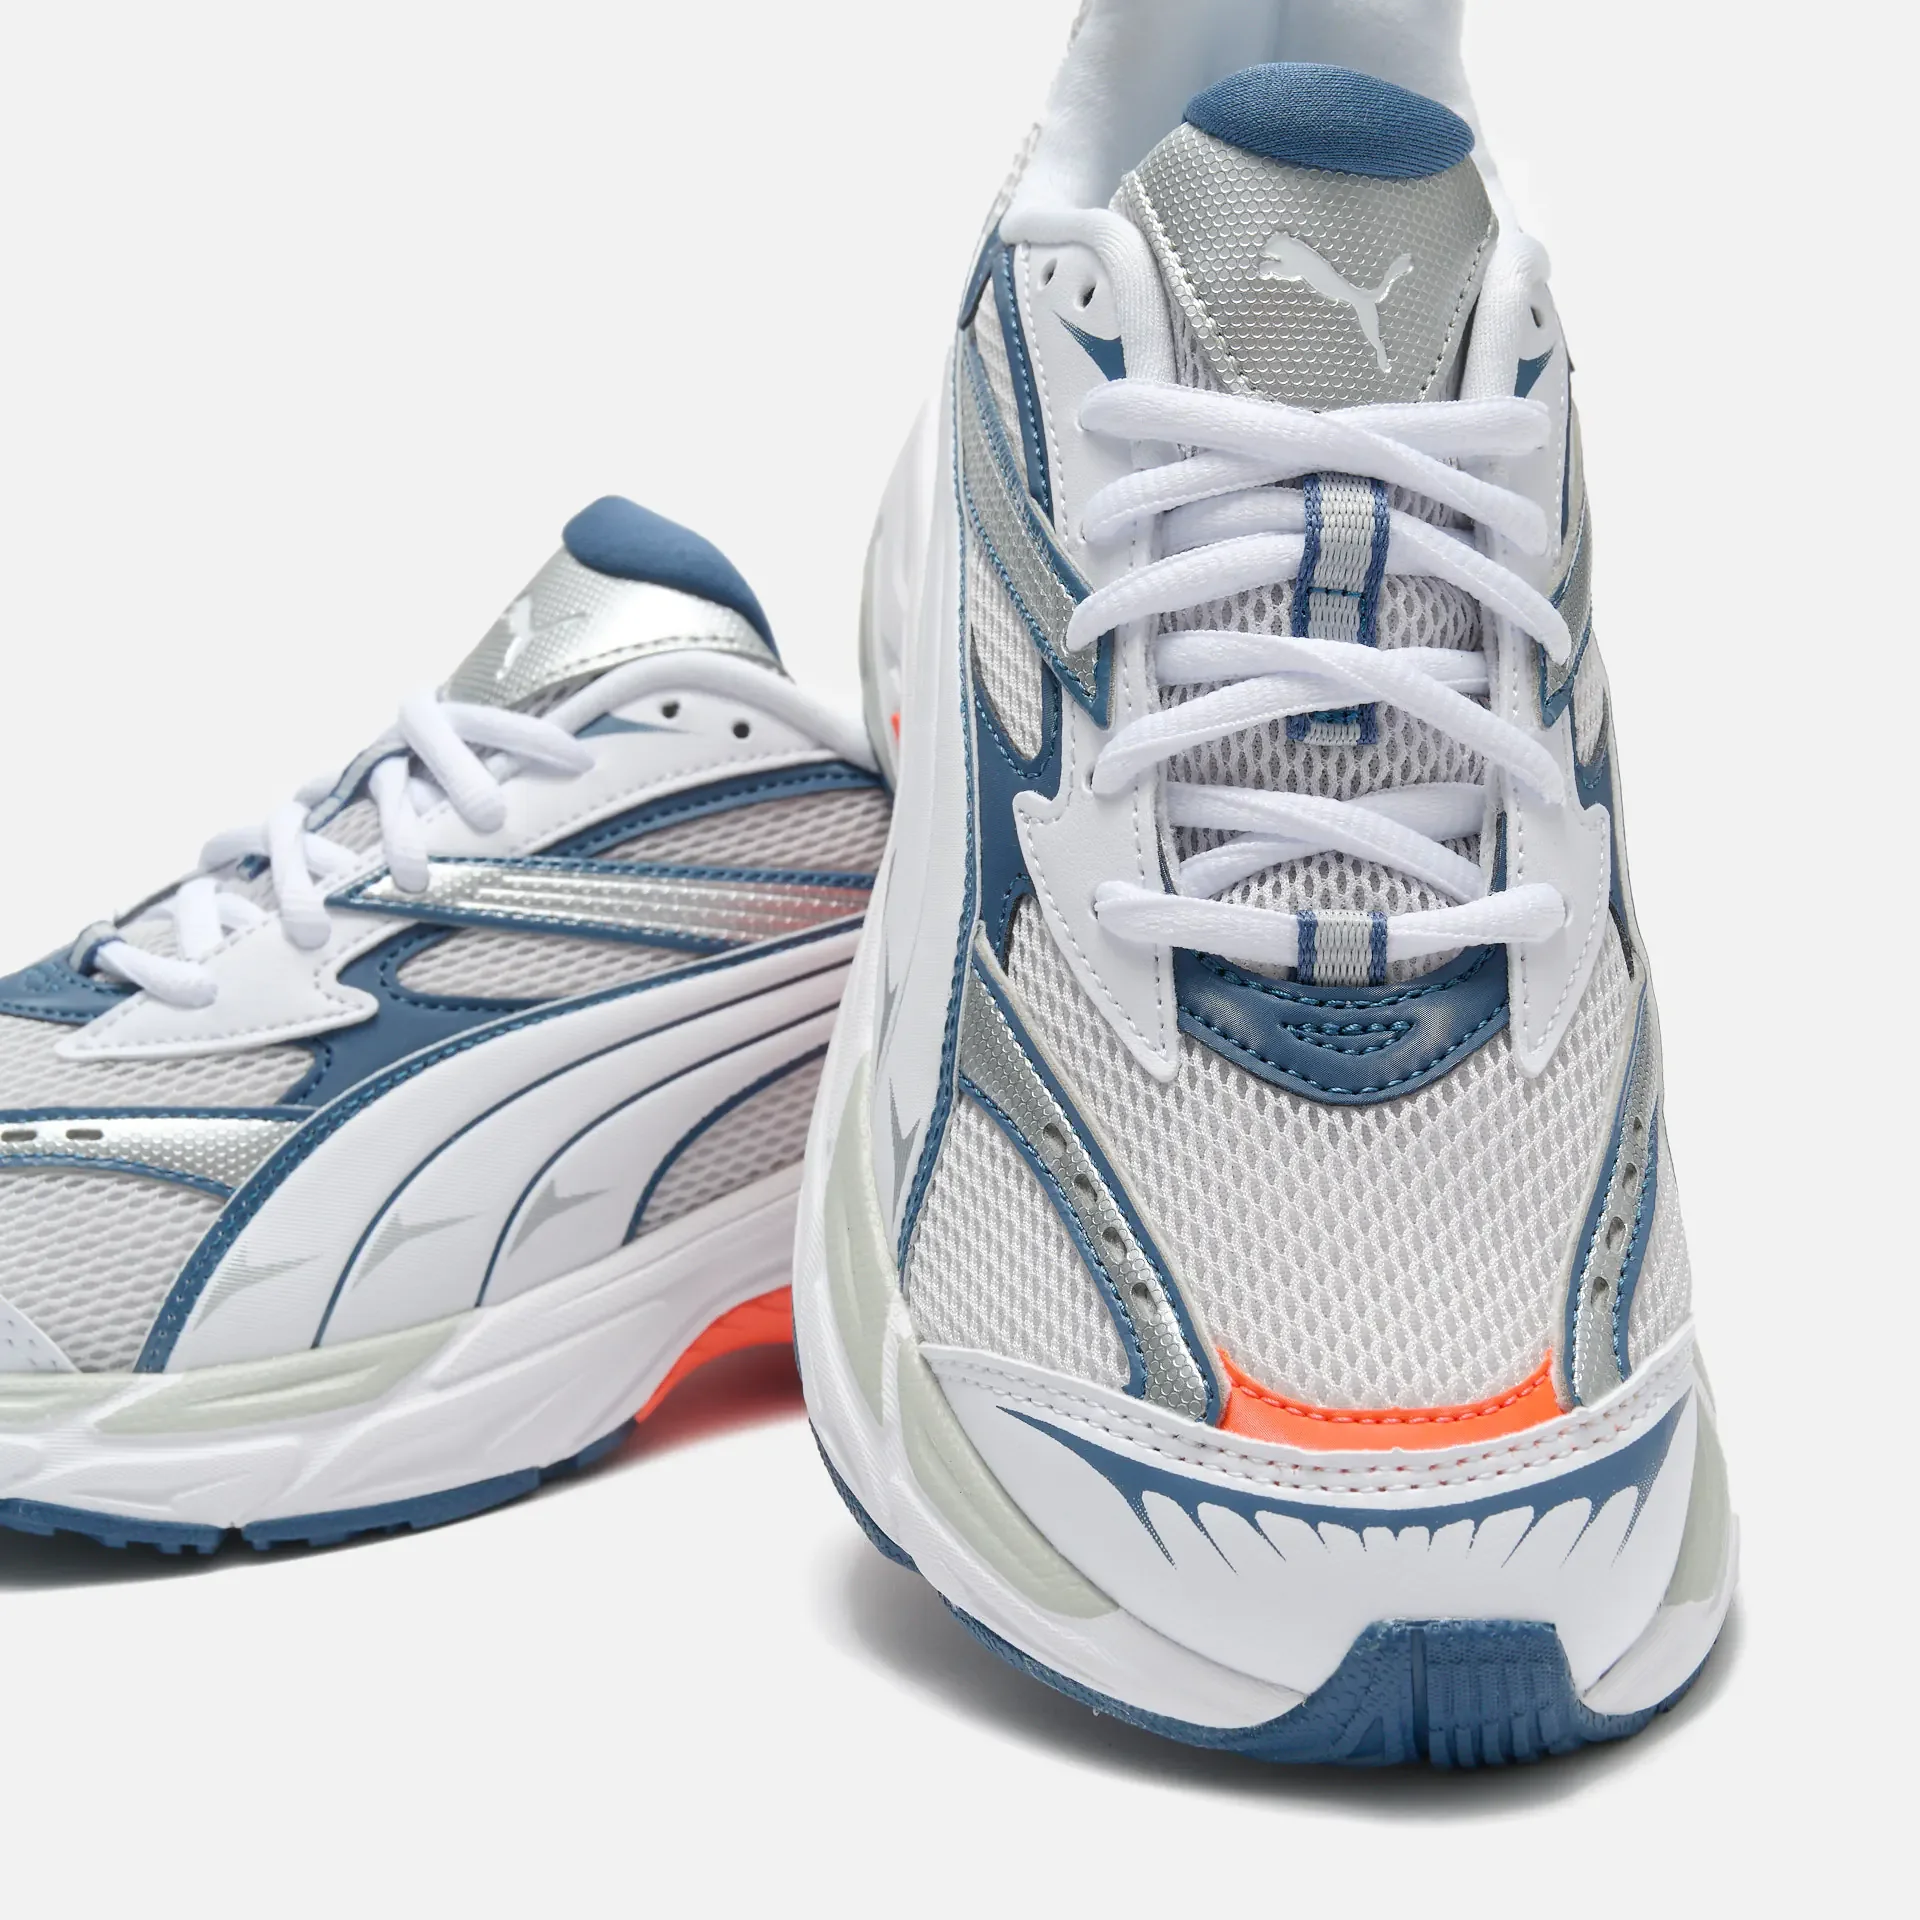 PUMA Morphic Feather Gray Inky Blue